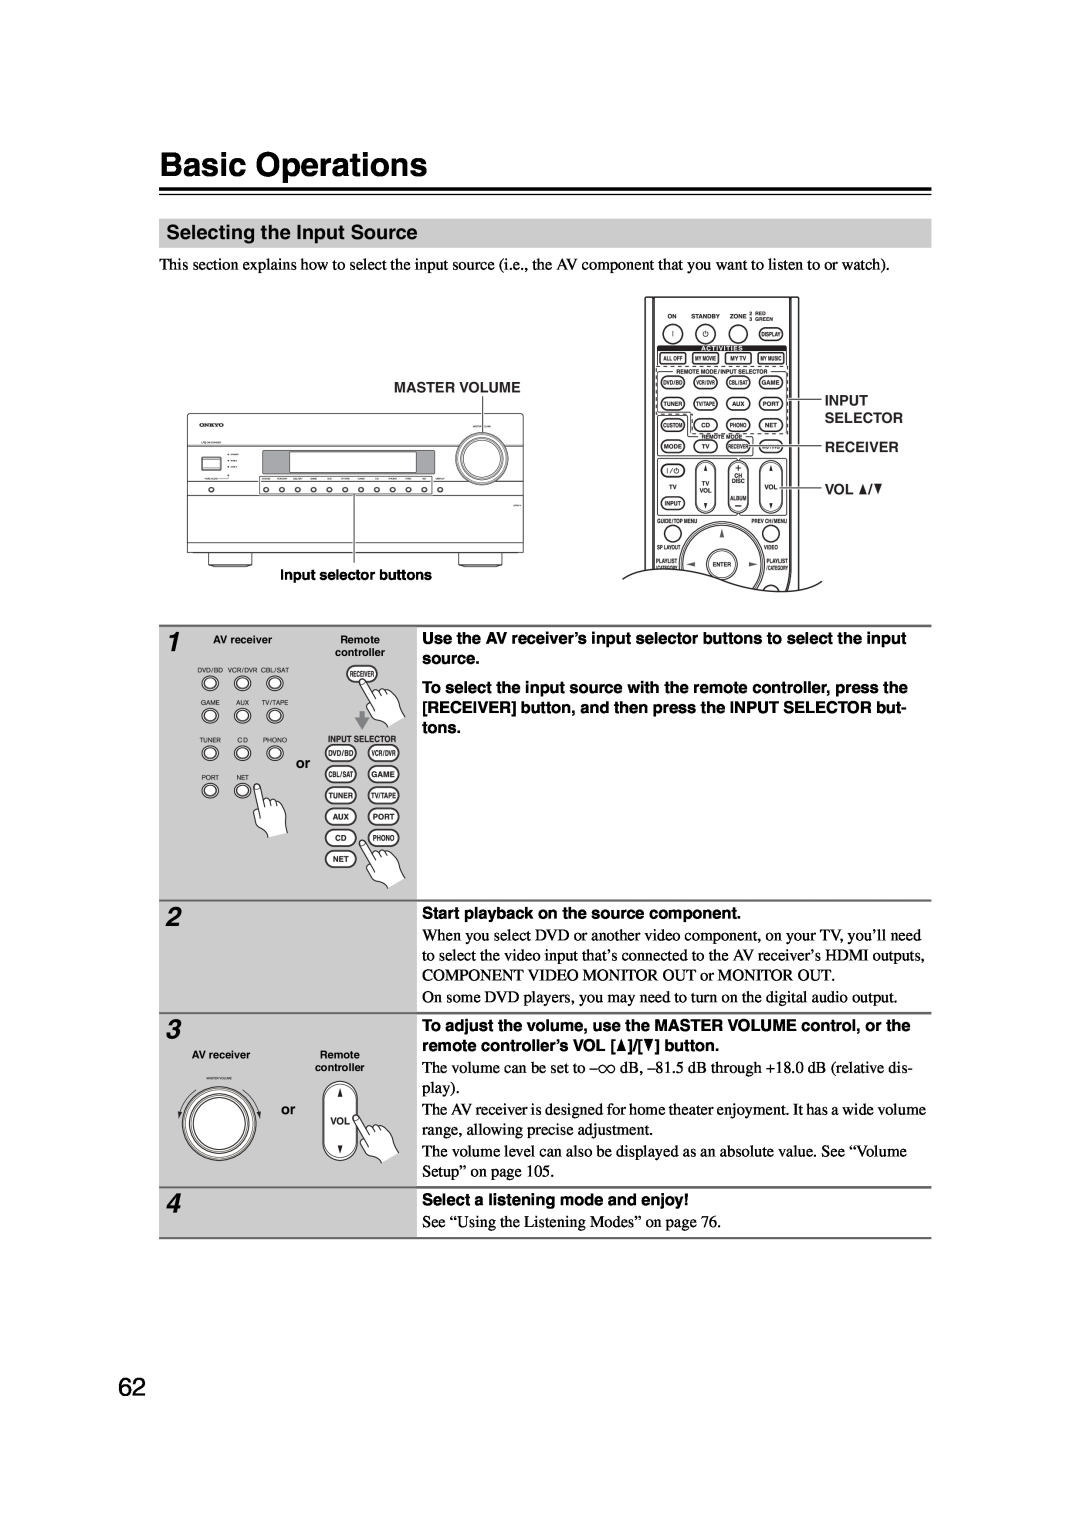 Onkyo TX-NR1007 instruction manual Basic Operations, Selecting the Input Source 